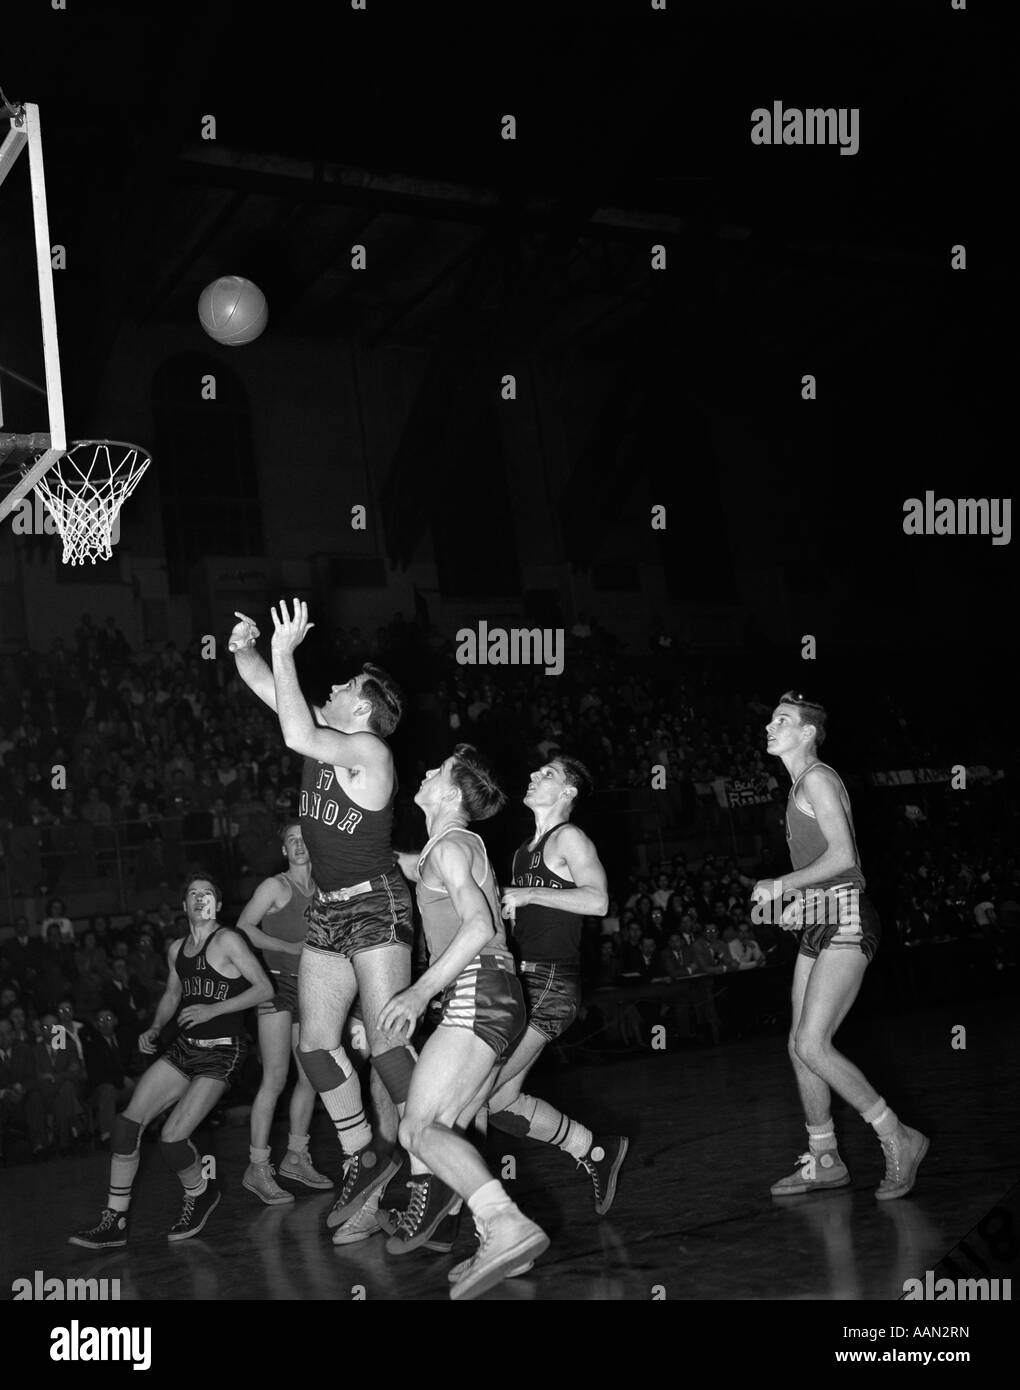 1940s 1950s BASKETBALL GAME INDOORS BASKETBALL JUST THROWN ABOUT TO GO IN BASKET Stock Photo